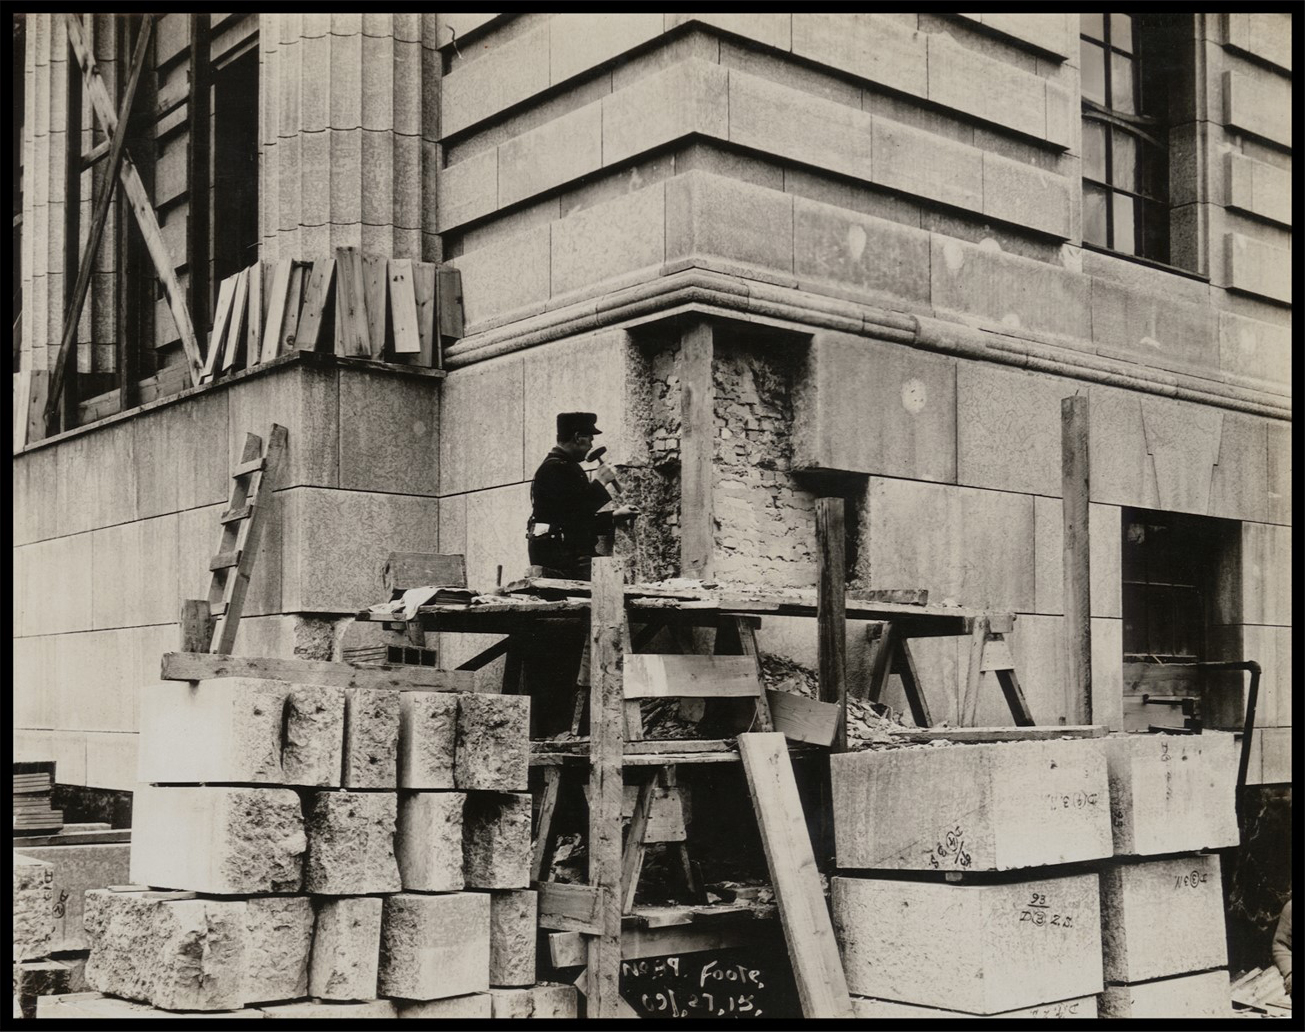 A mason working on large slabs of stone on the exterior base of the building.